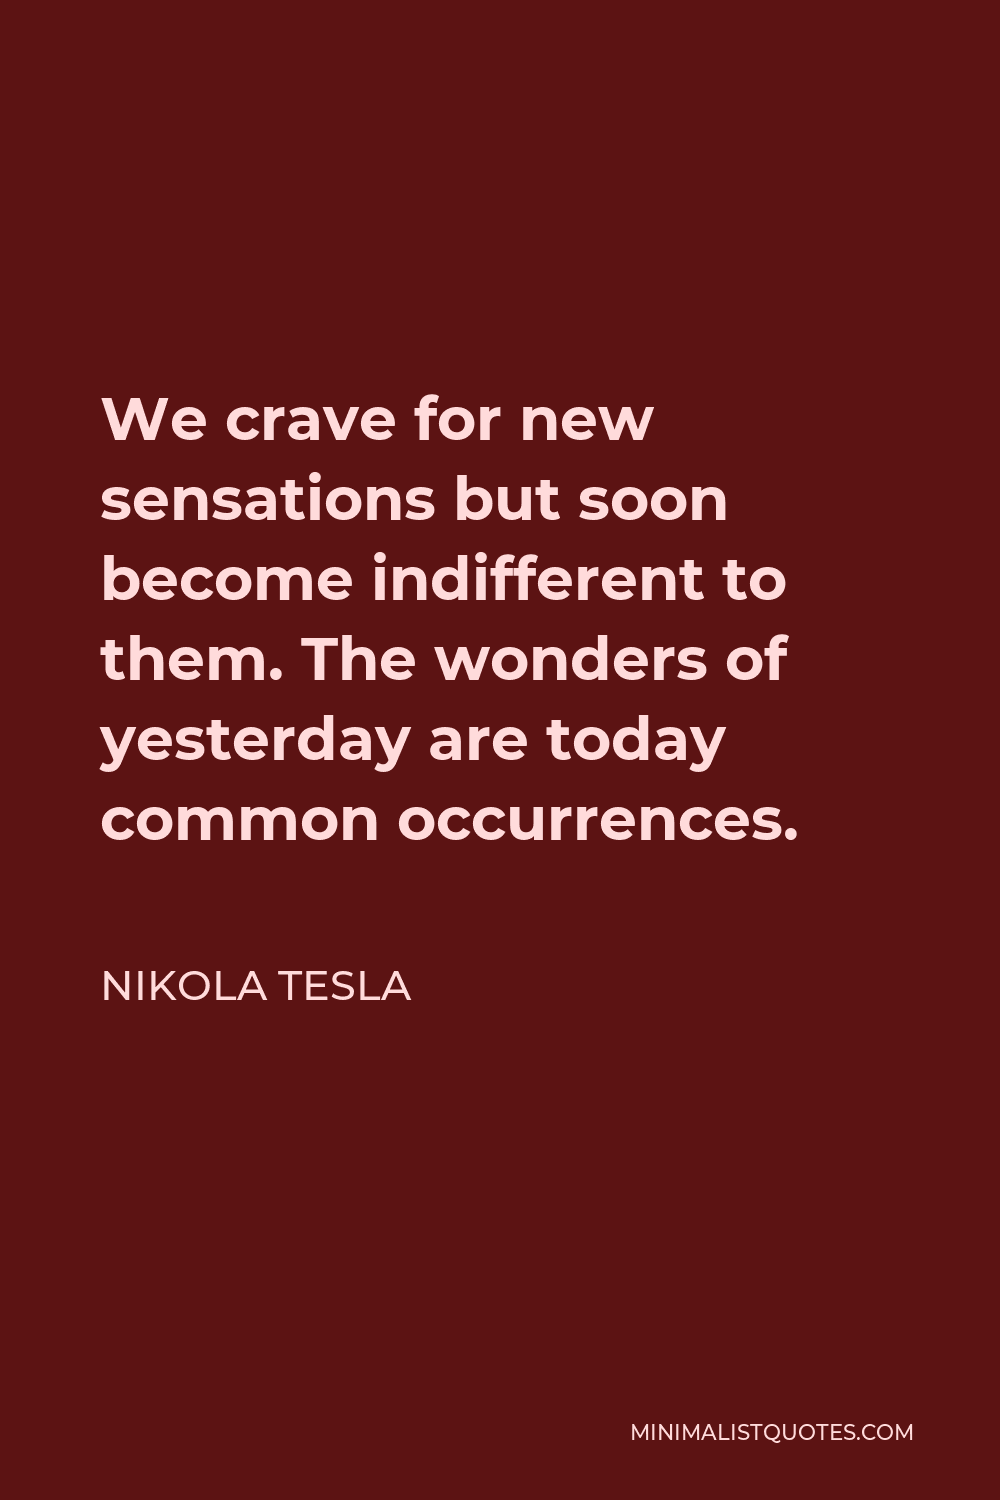 Nikola Tesla Quote - We crave for new sensations but soon become indifferent to them. The wonders of yesterday are today common occurrences.